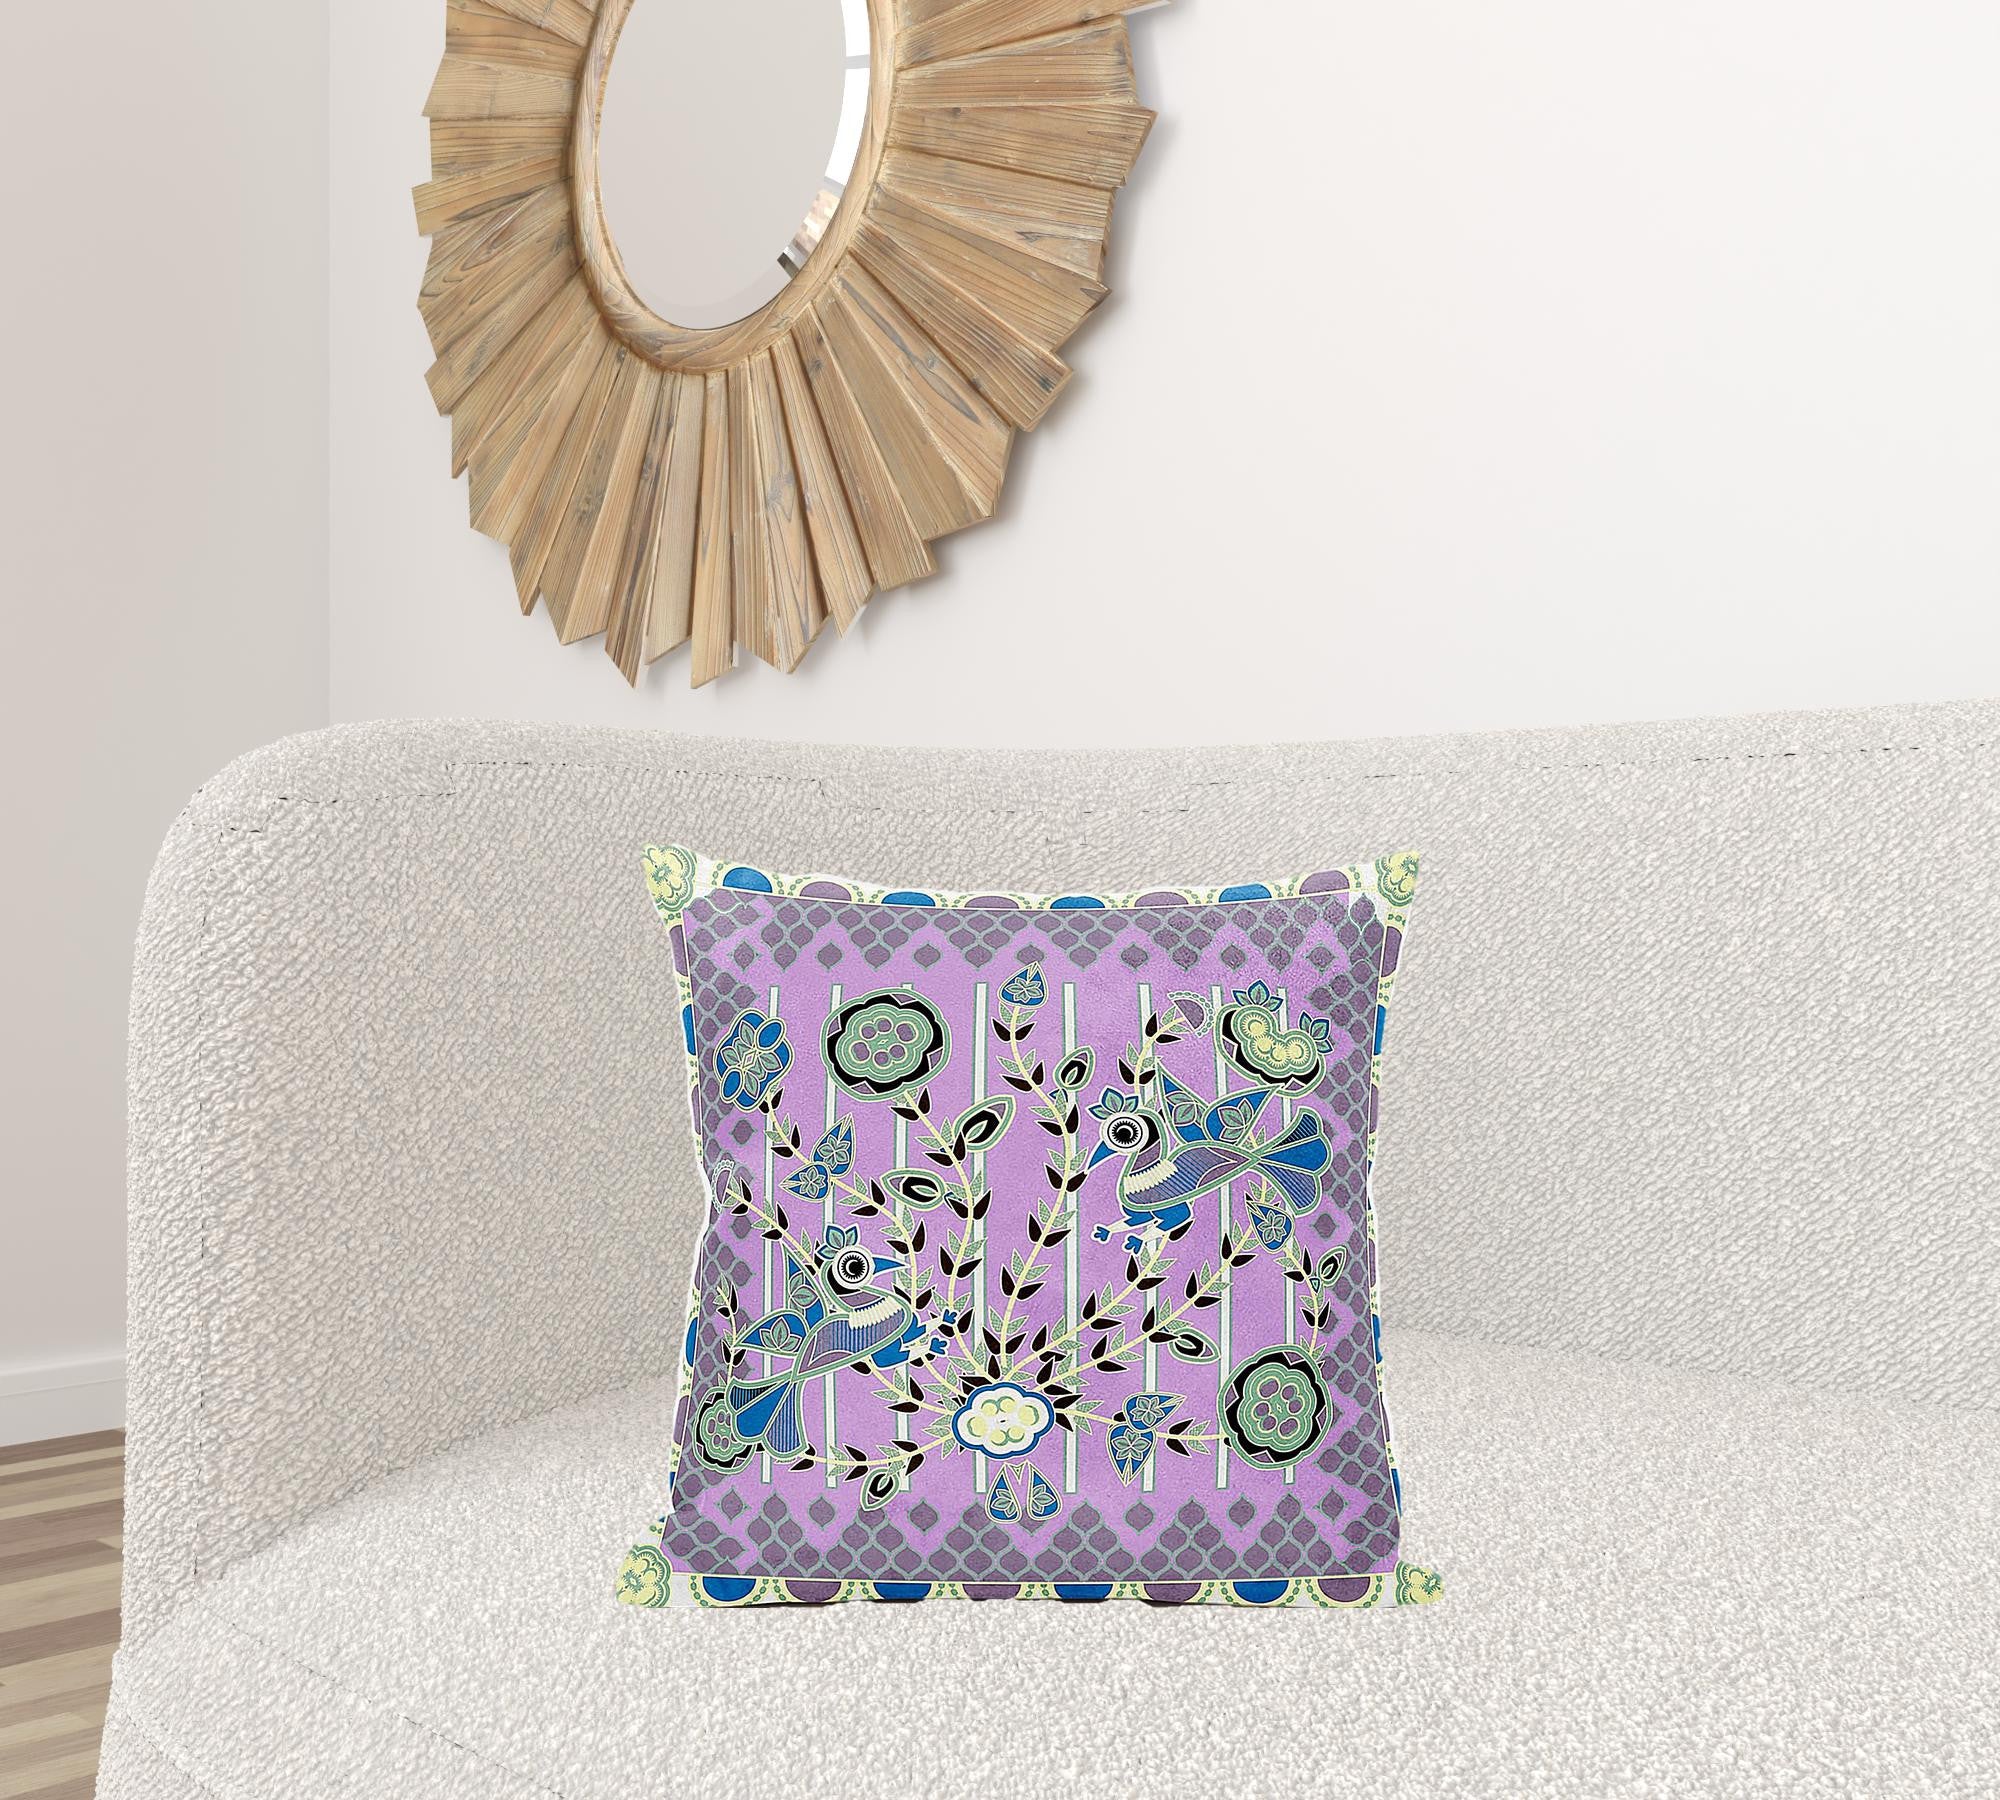 20" X 20" Purple and Black Peacock Broadcloth Floral Zippered Pillow